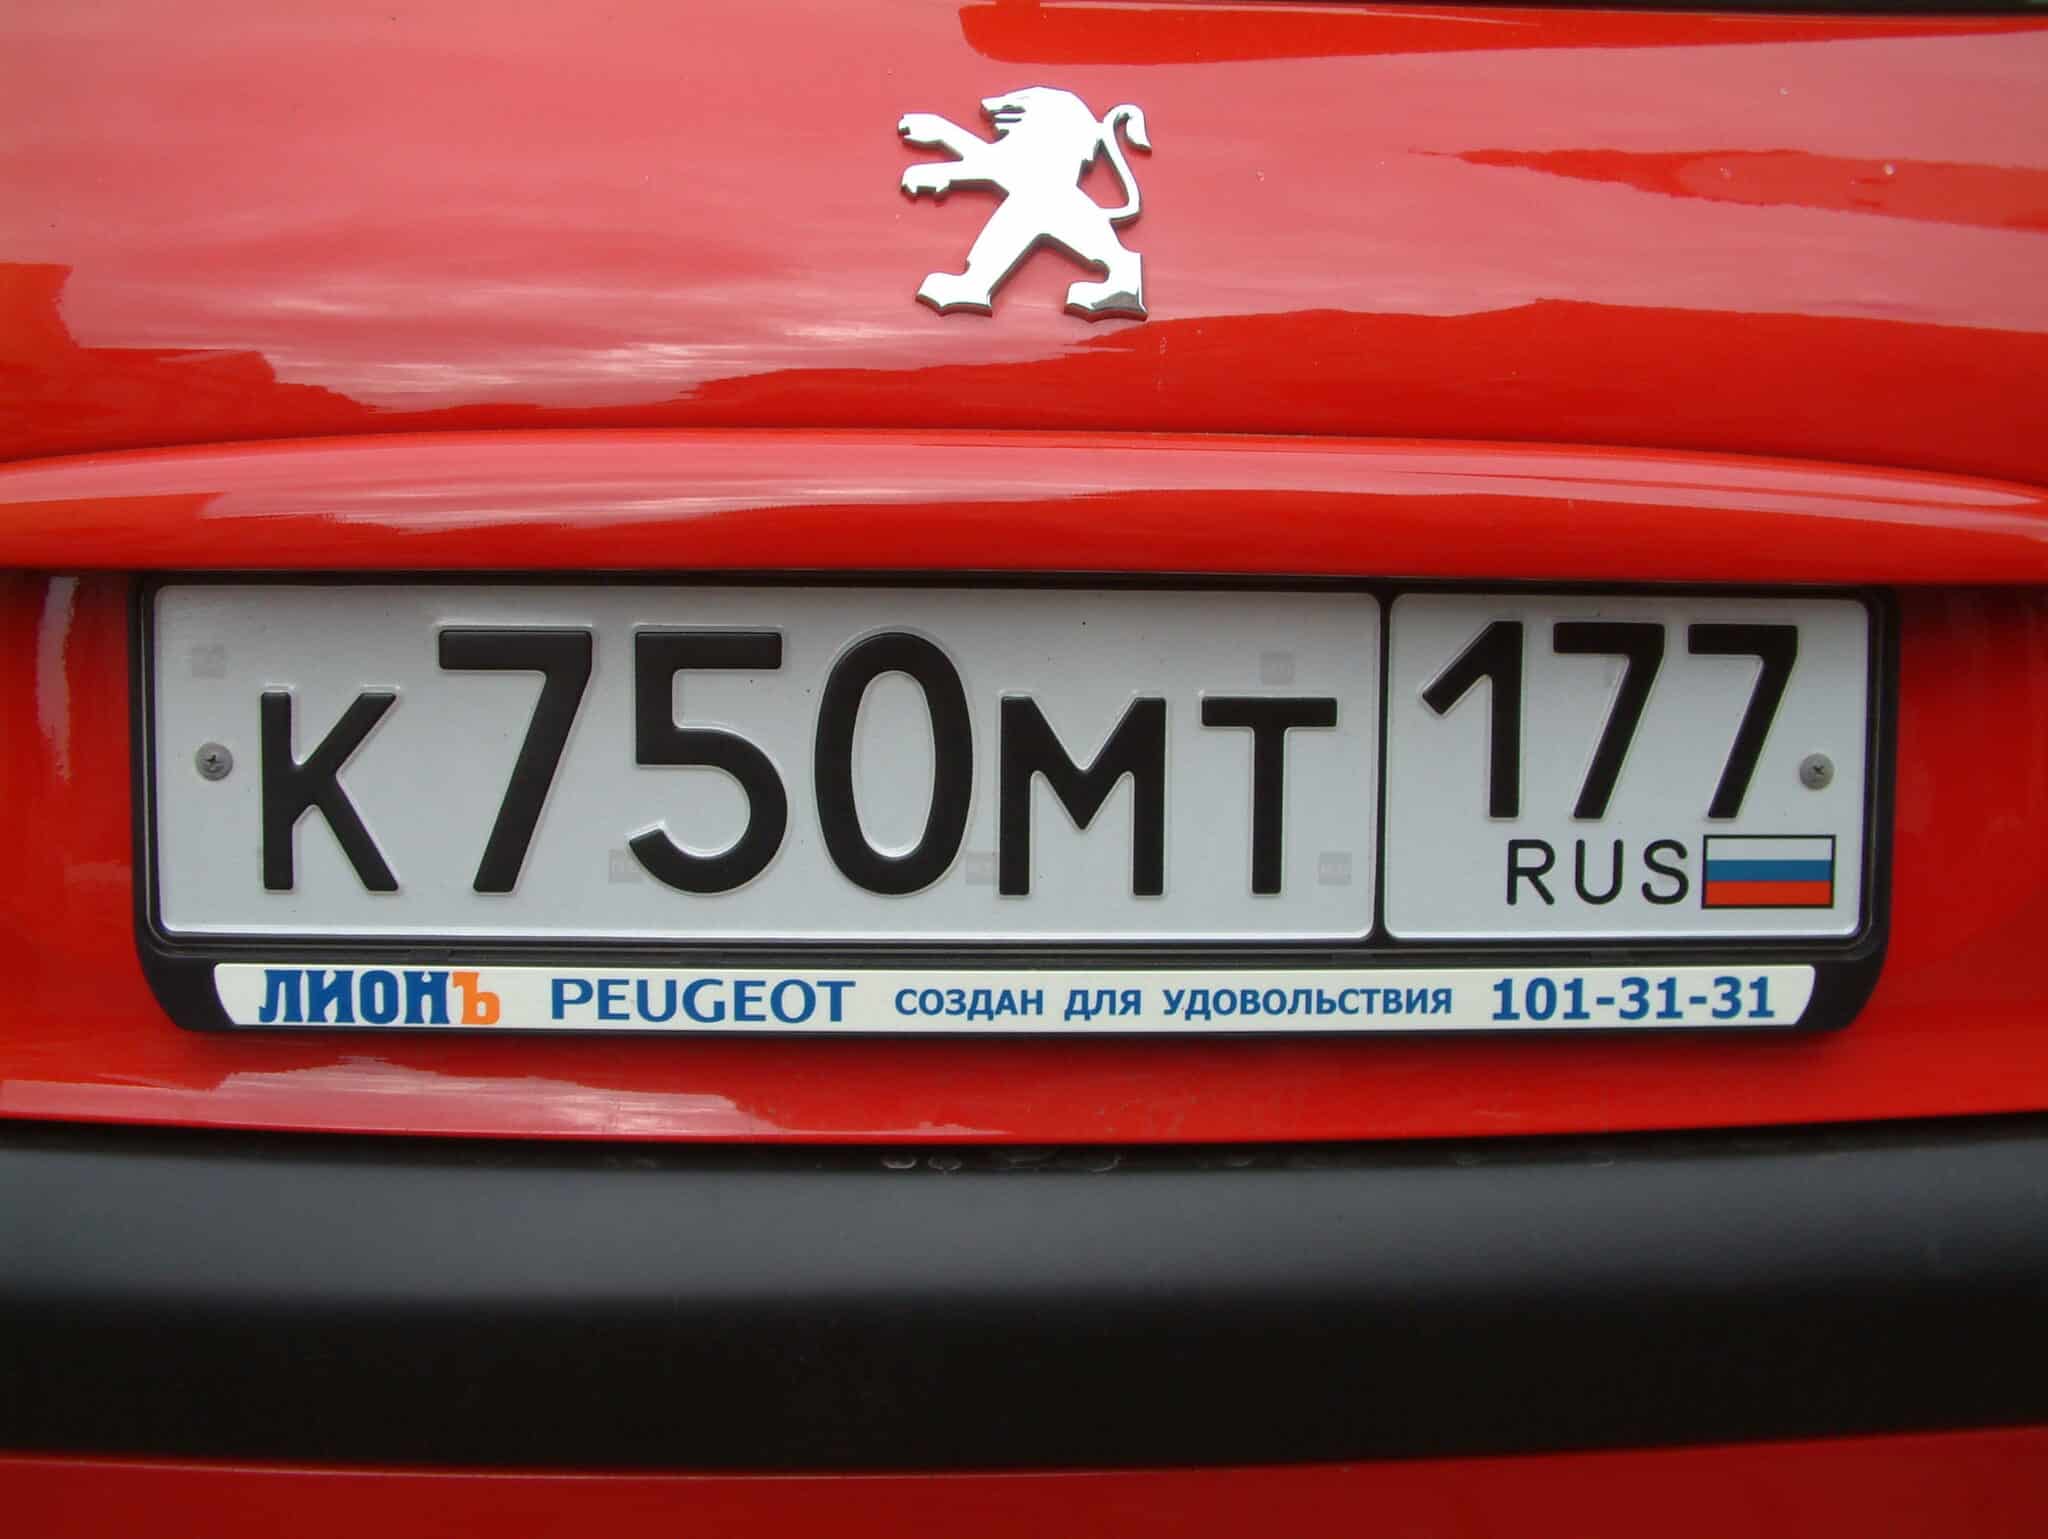 Estonia Grants Six-Month Grace Period for Russian License Plate Owners